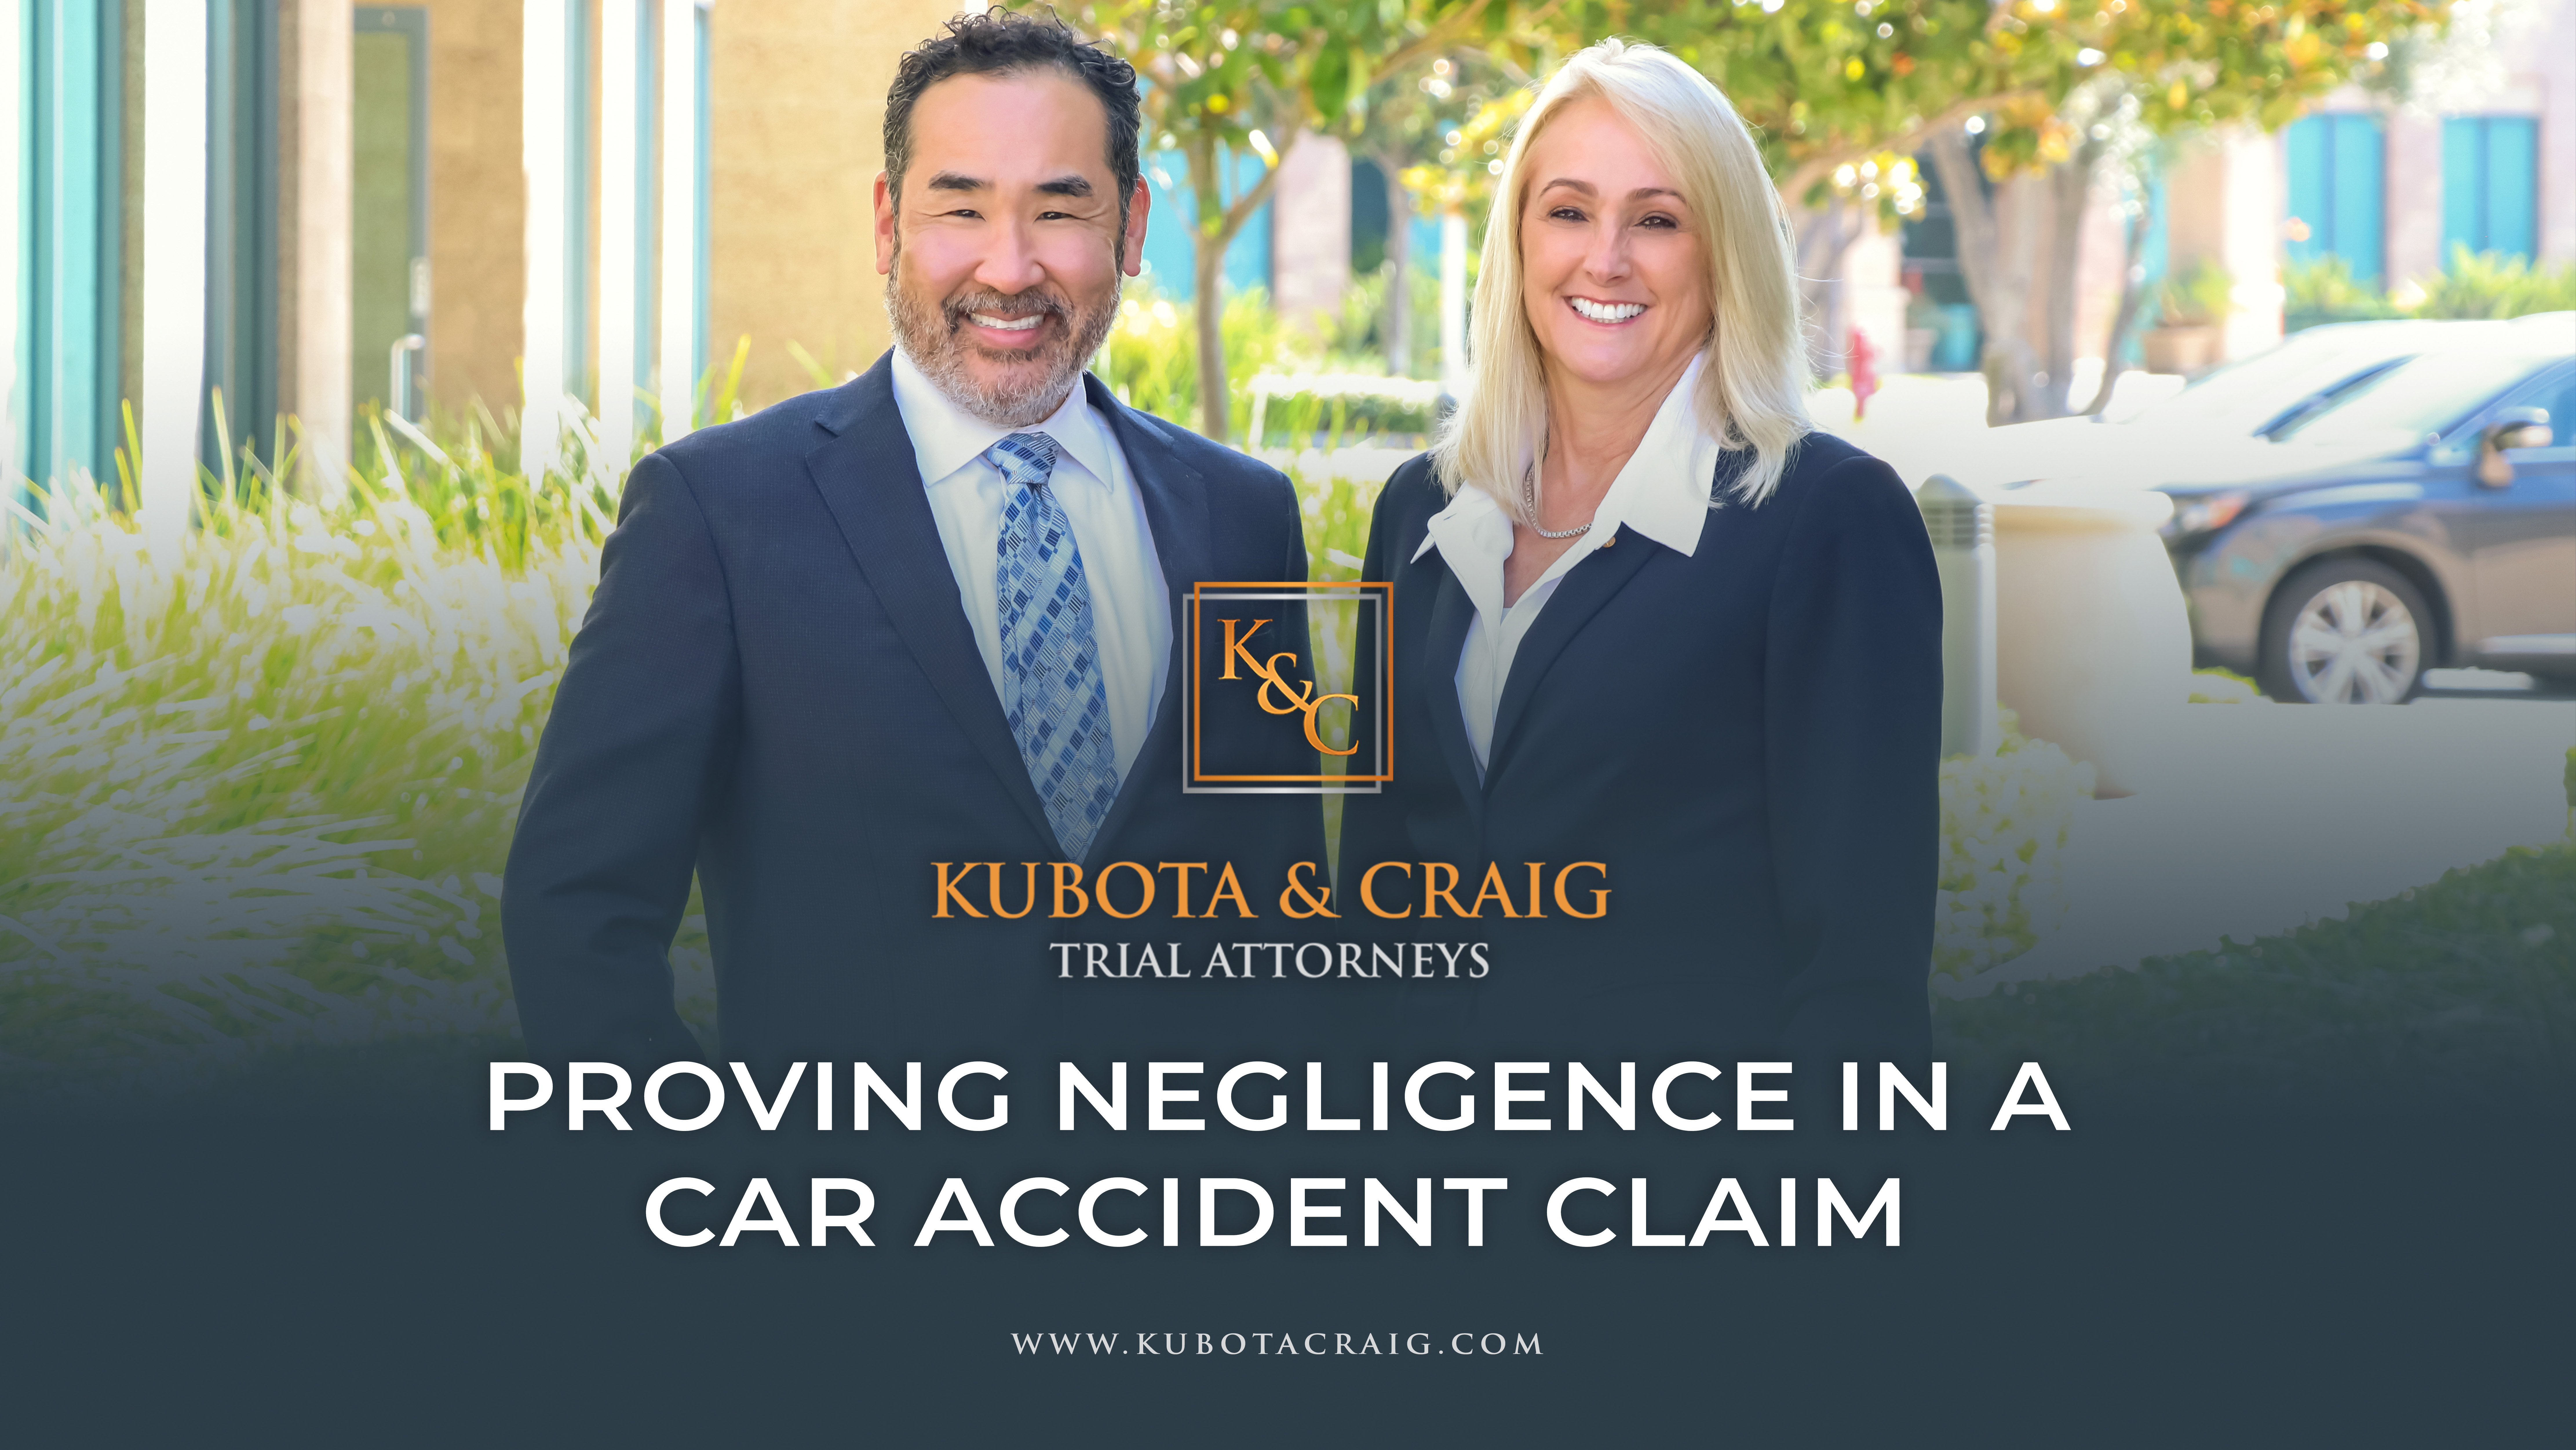 Irvine Car Accident Attorneys Kubota & Craig blog post about proving negligence in a car accident claim.